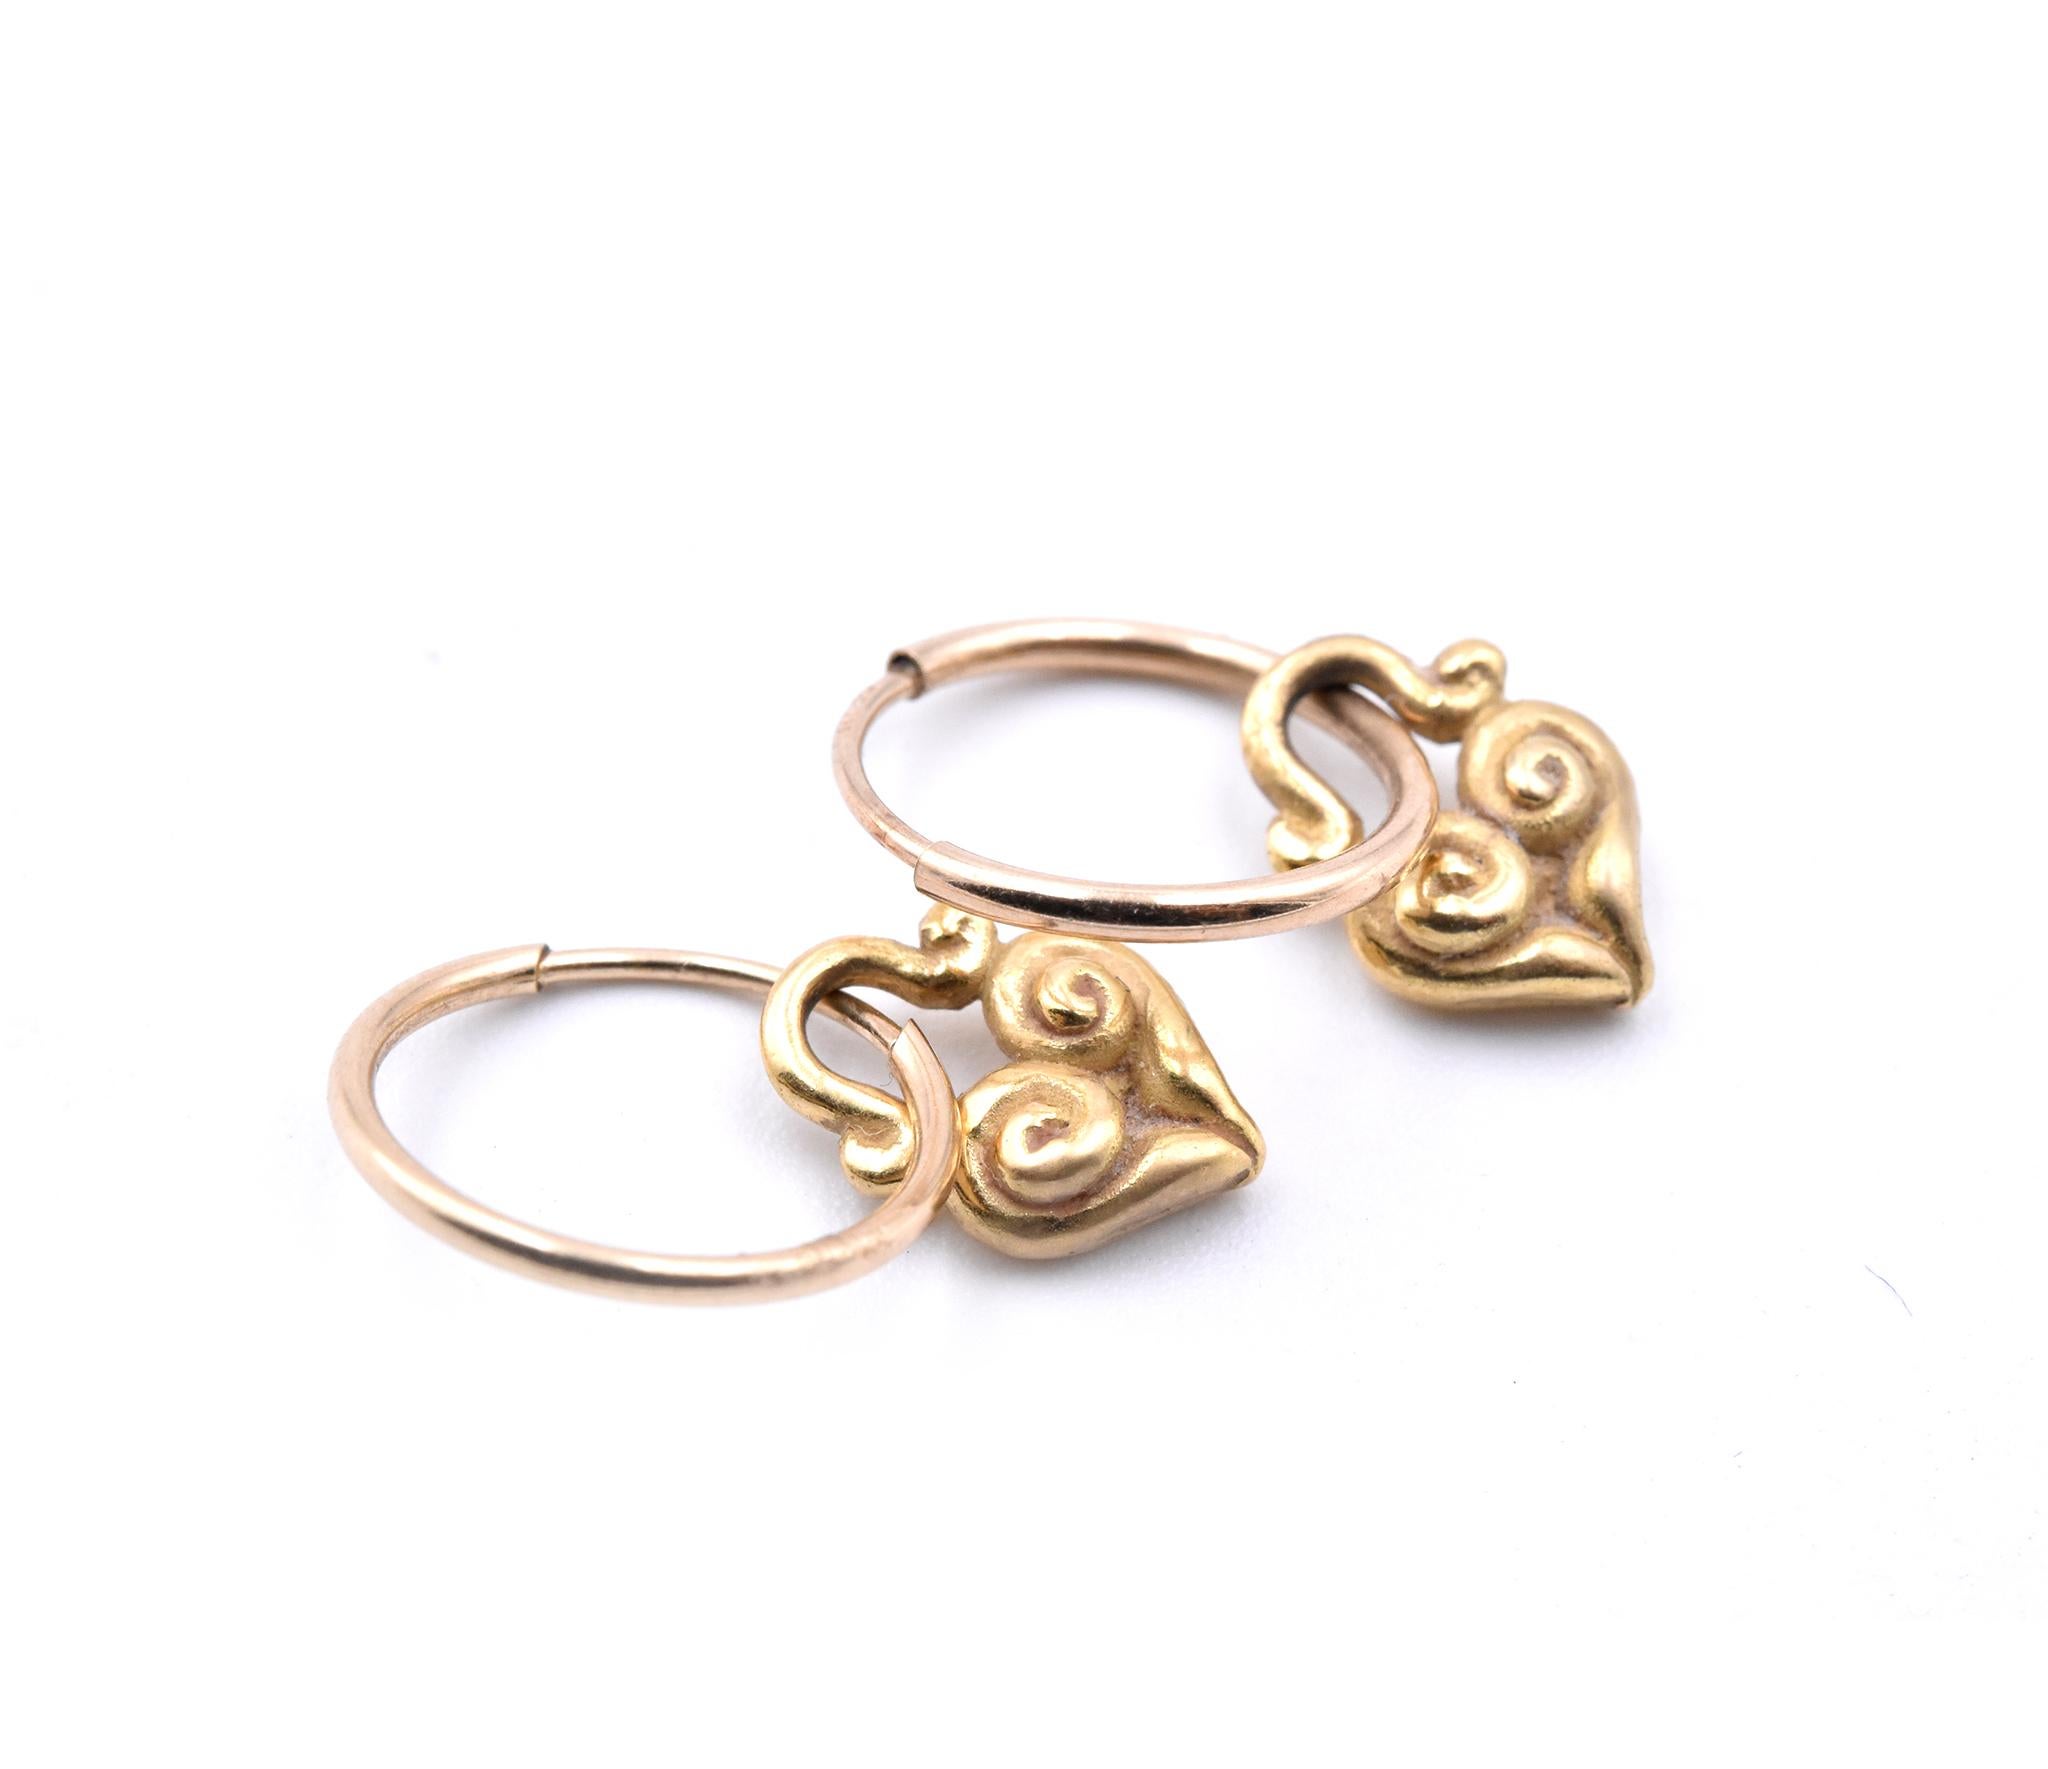 Designer: Lee Brevard
Material: 18K Yellow Gold 
Dimensions: the earring measures 20.01 X 7.08mm
Weight: 2.22 grams
